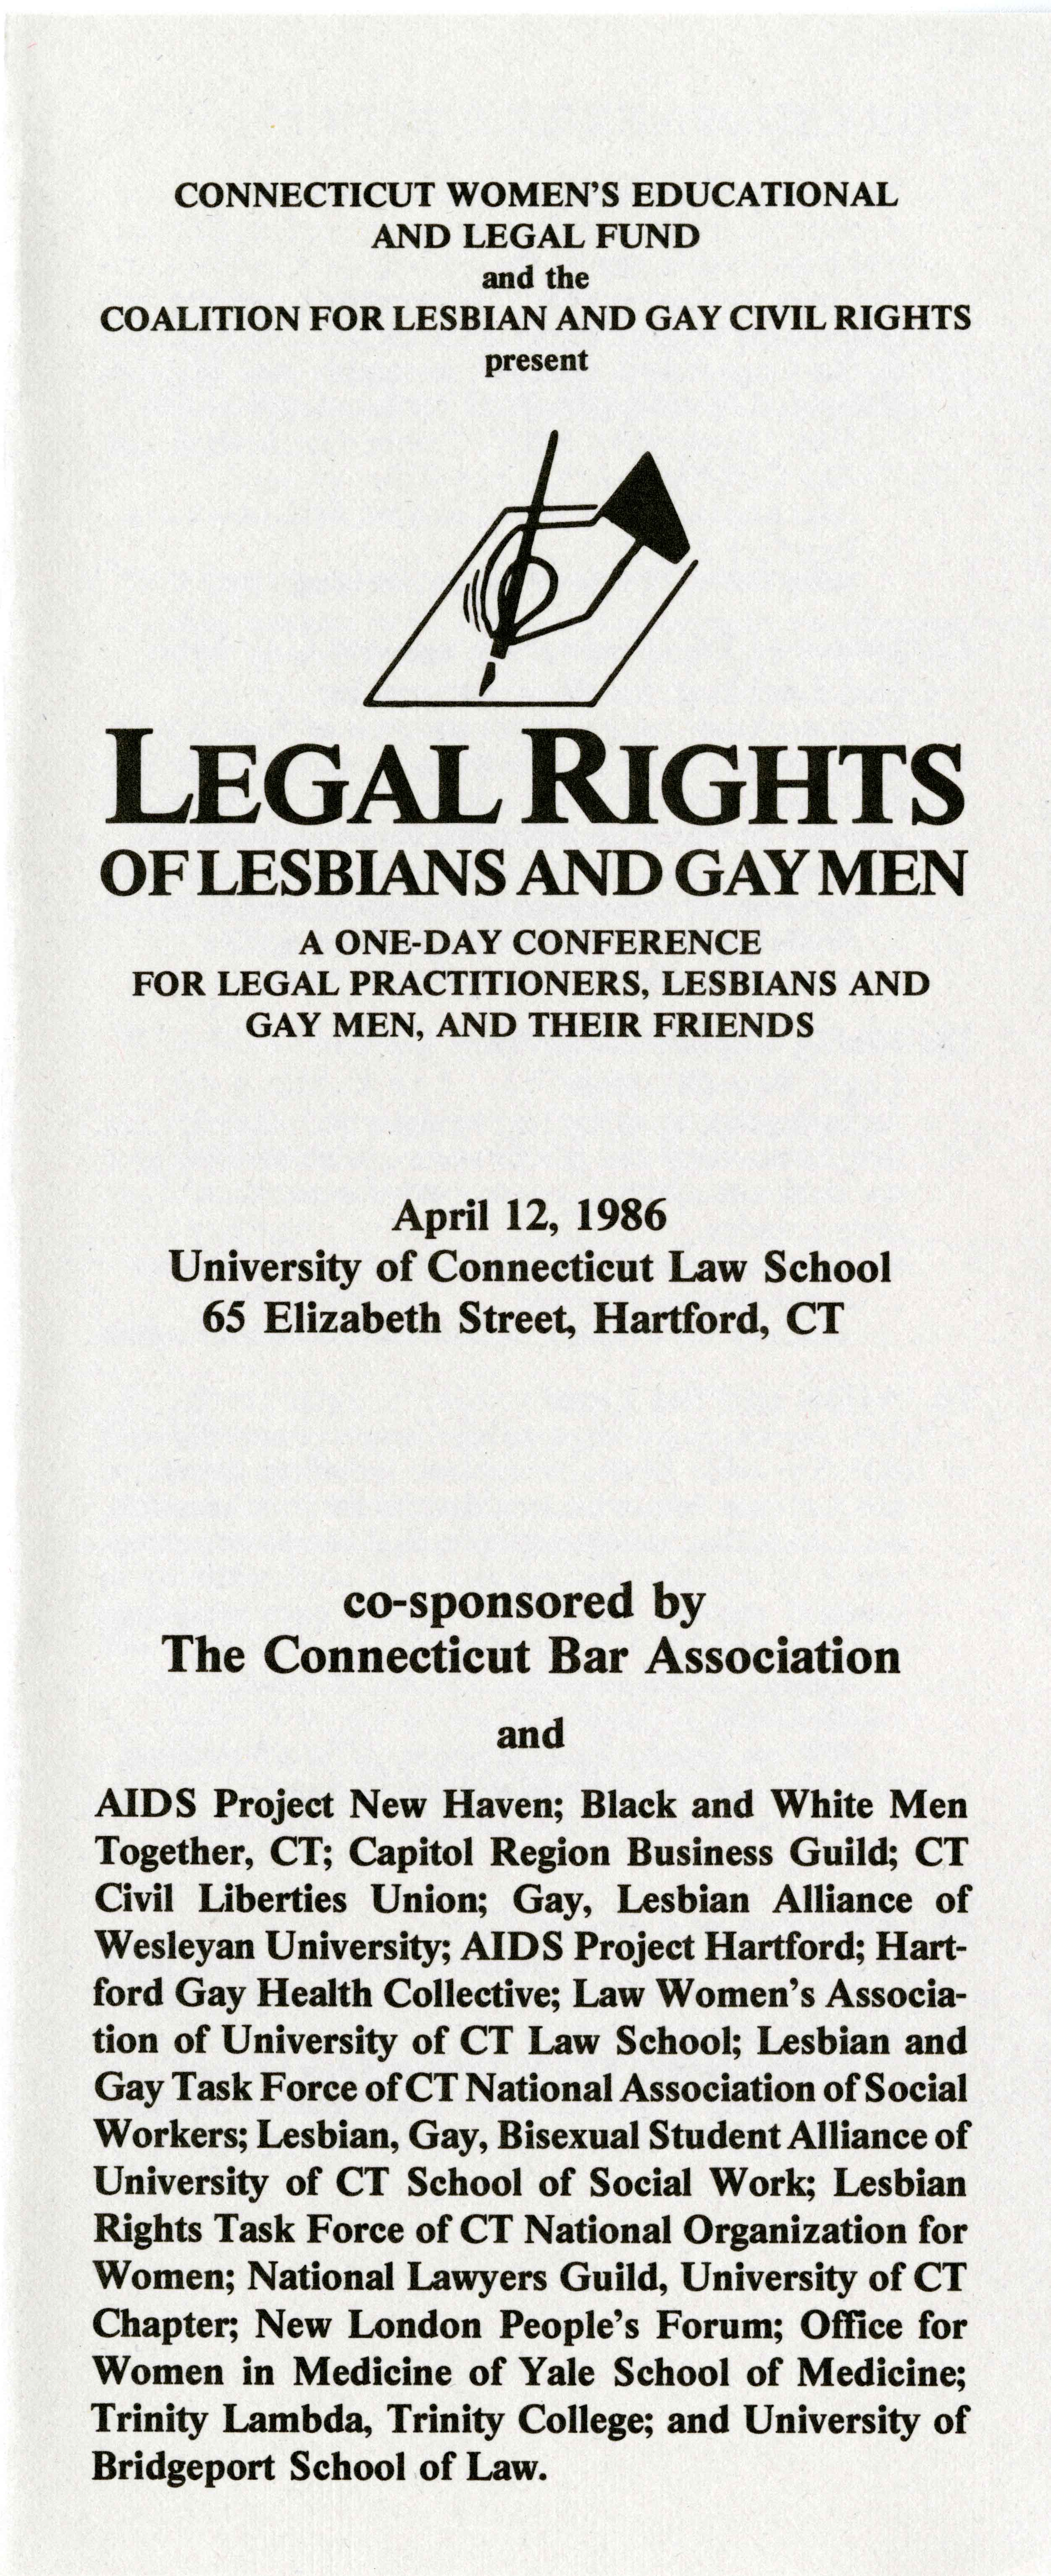 -	Front cover of pamphlet for CWEALF conference on Legal Rights of Lesbians & Gay Men (April 1986)